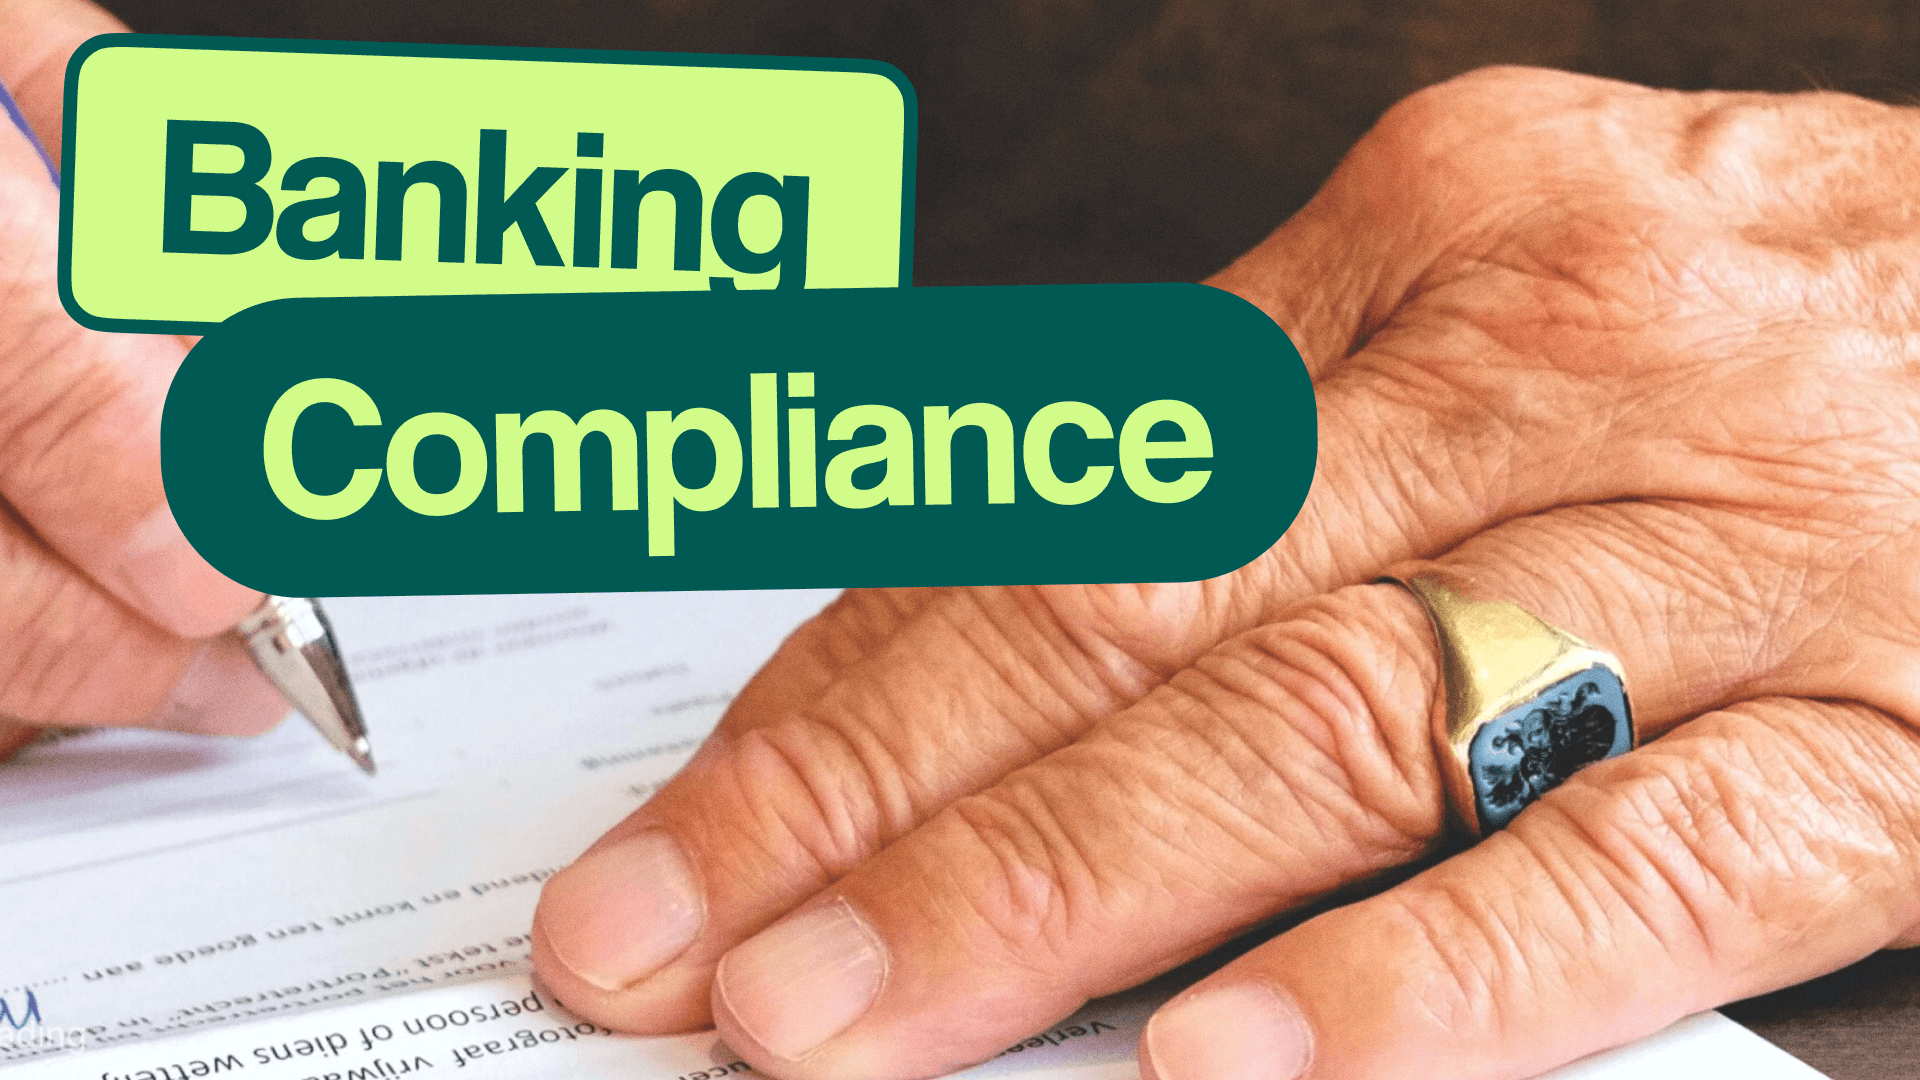 All You Need to Know About Banking Compliance